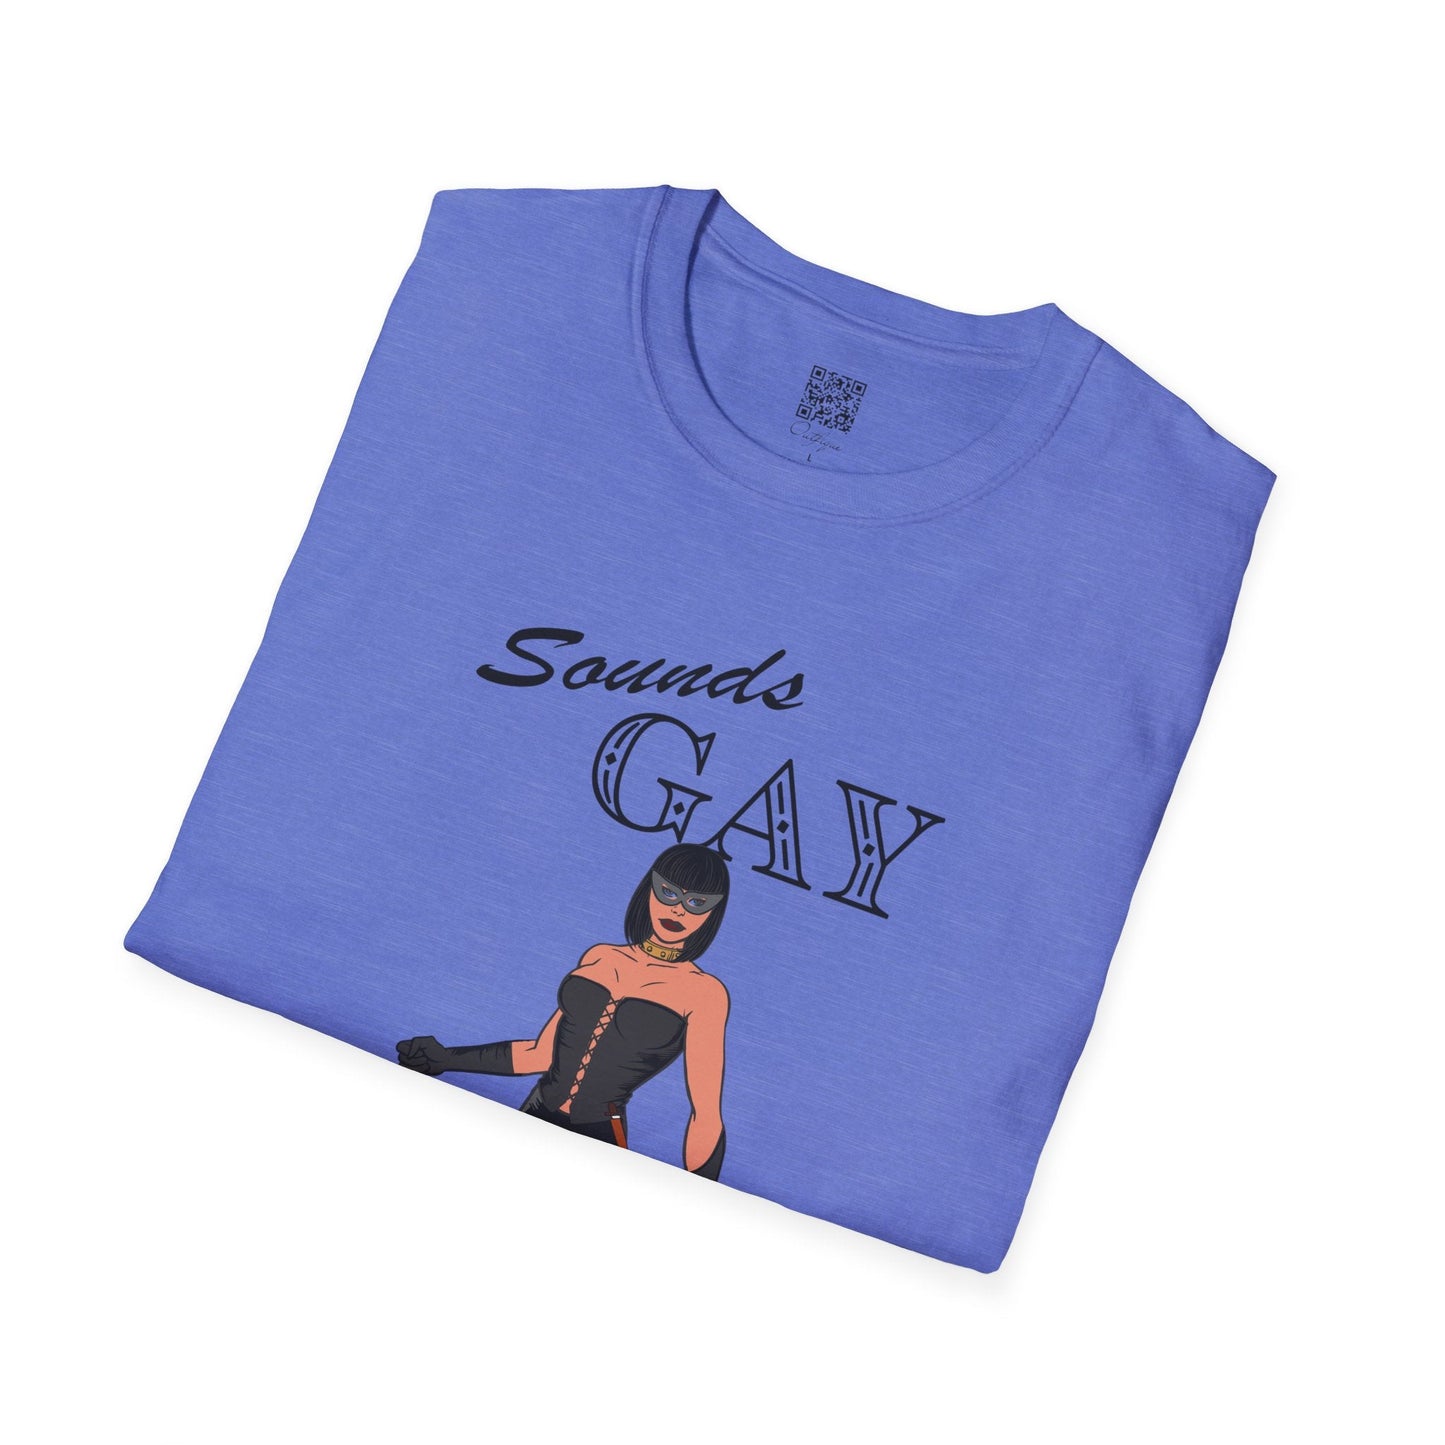 "Sounds Gay, I'm In!" T-Shirt | Outfique | T-Shirt | Crew neck